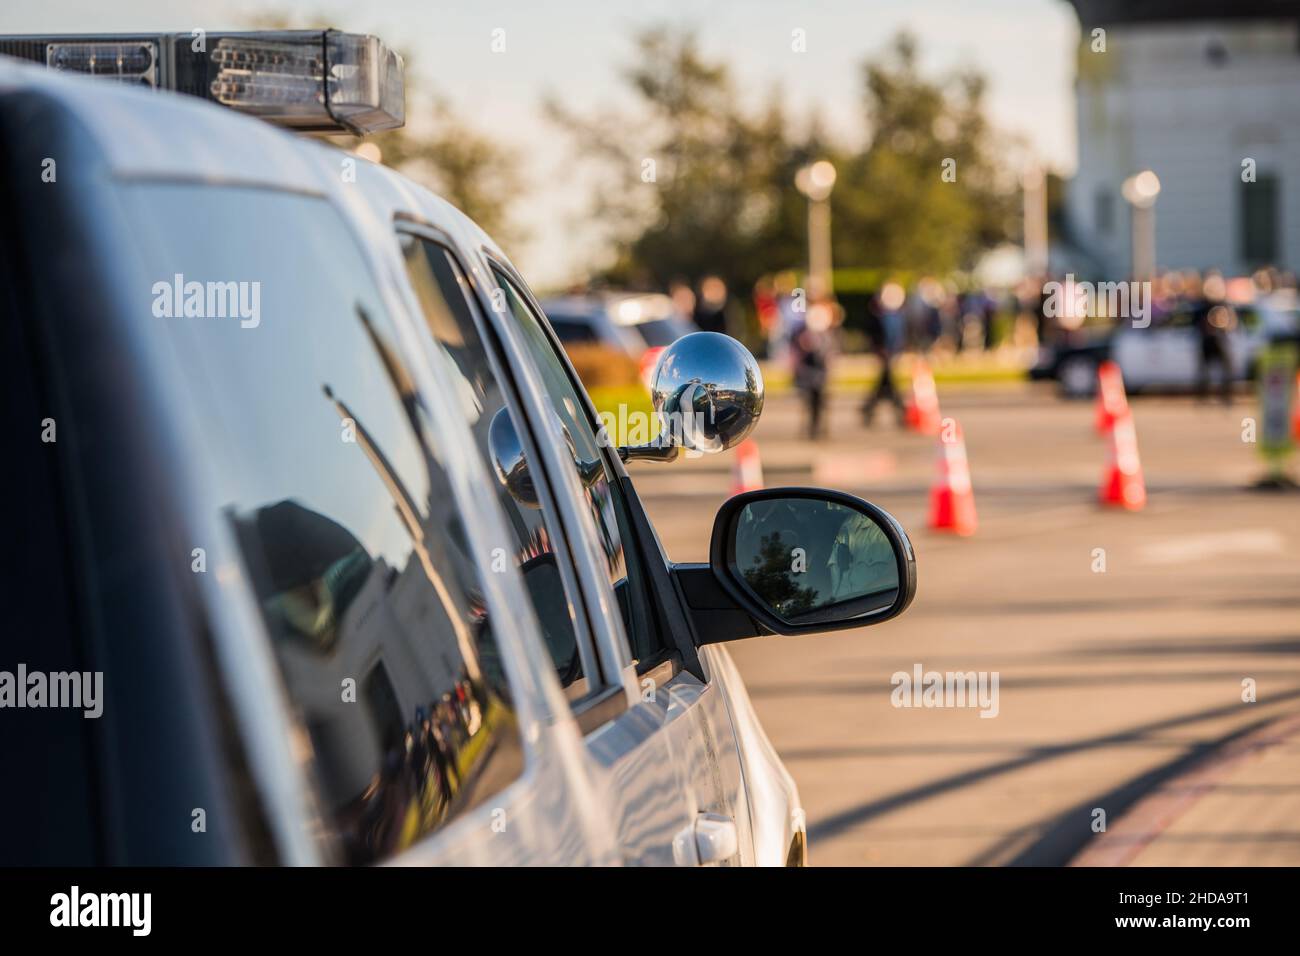 Local Police Supporting Large City Event. Police Cruiser Close Up and Some Crowd in a Background. Stock Photo